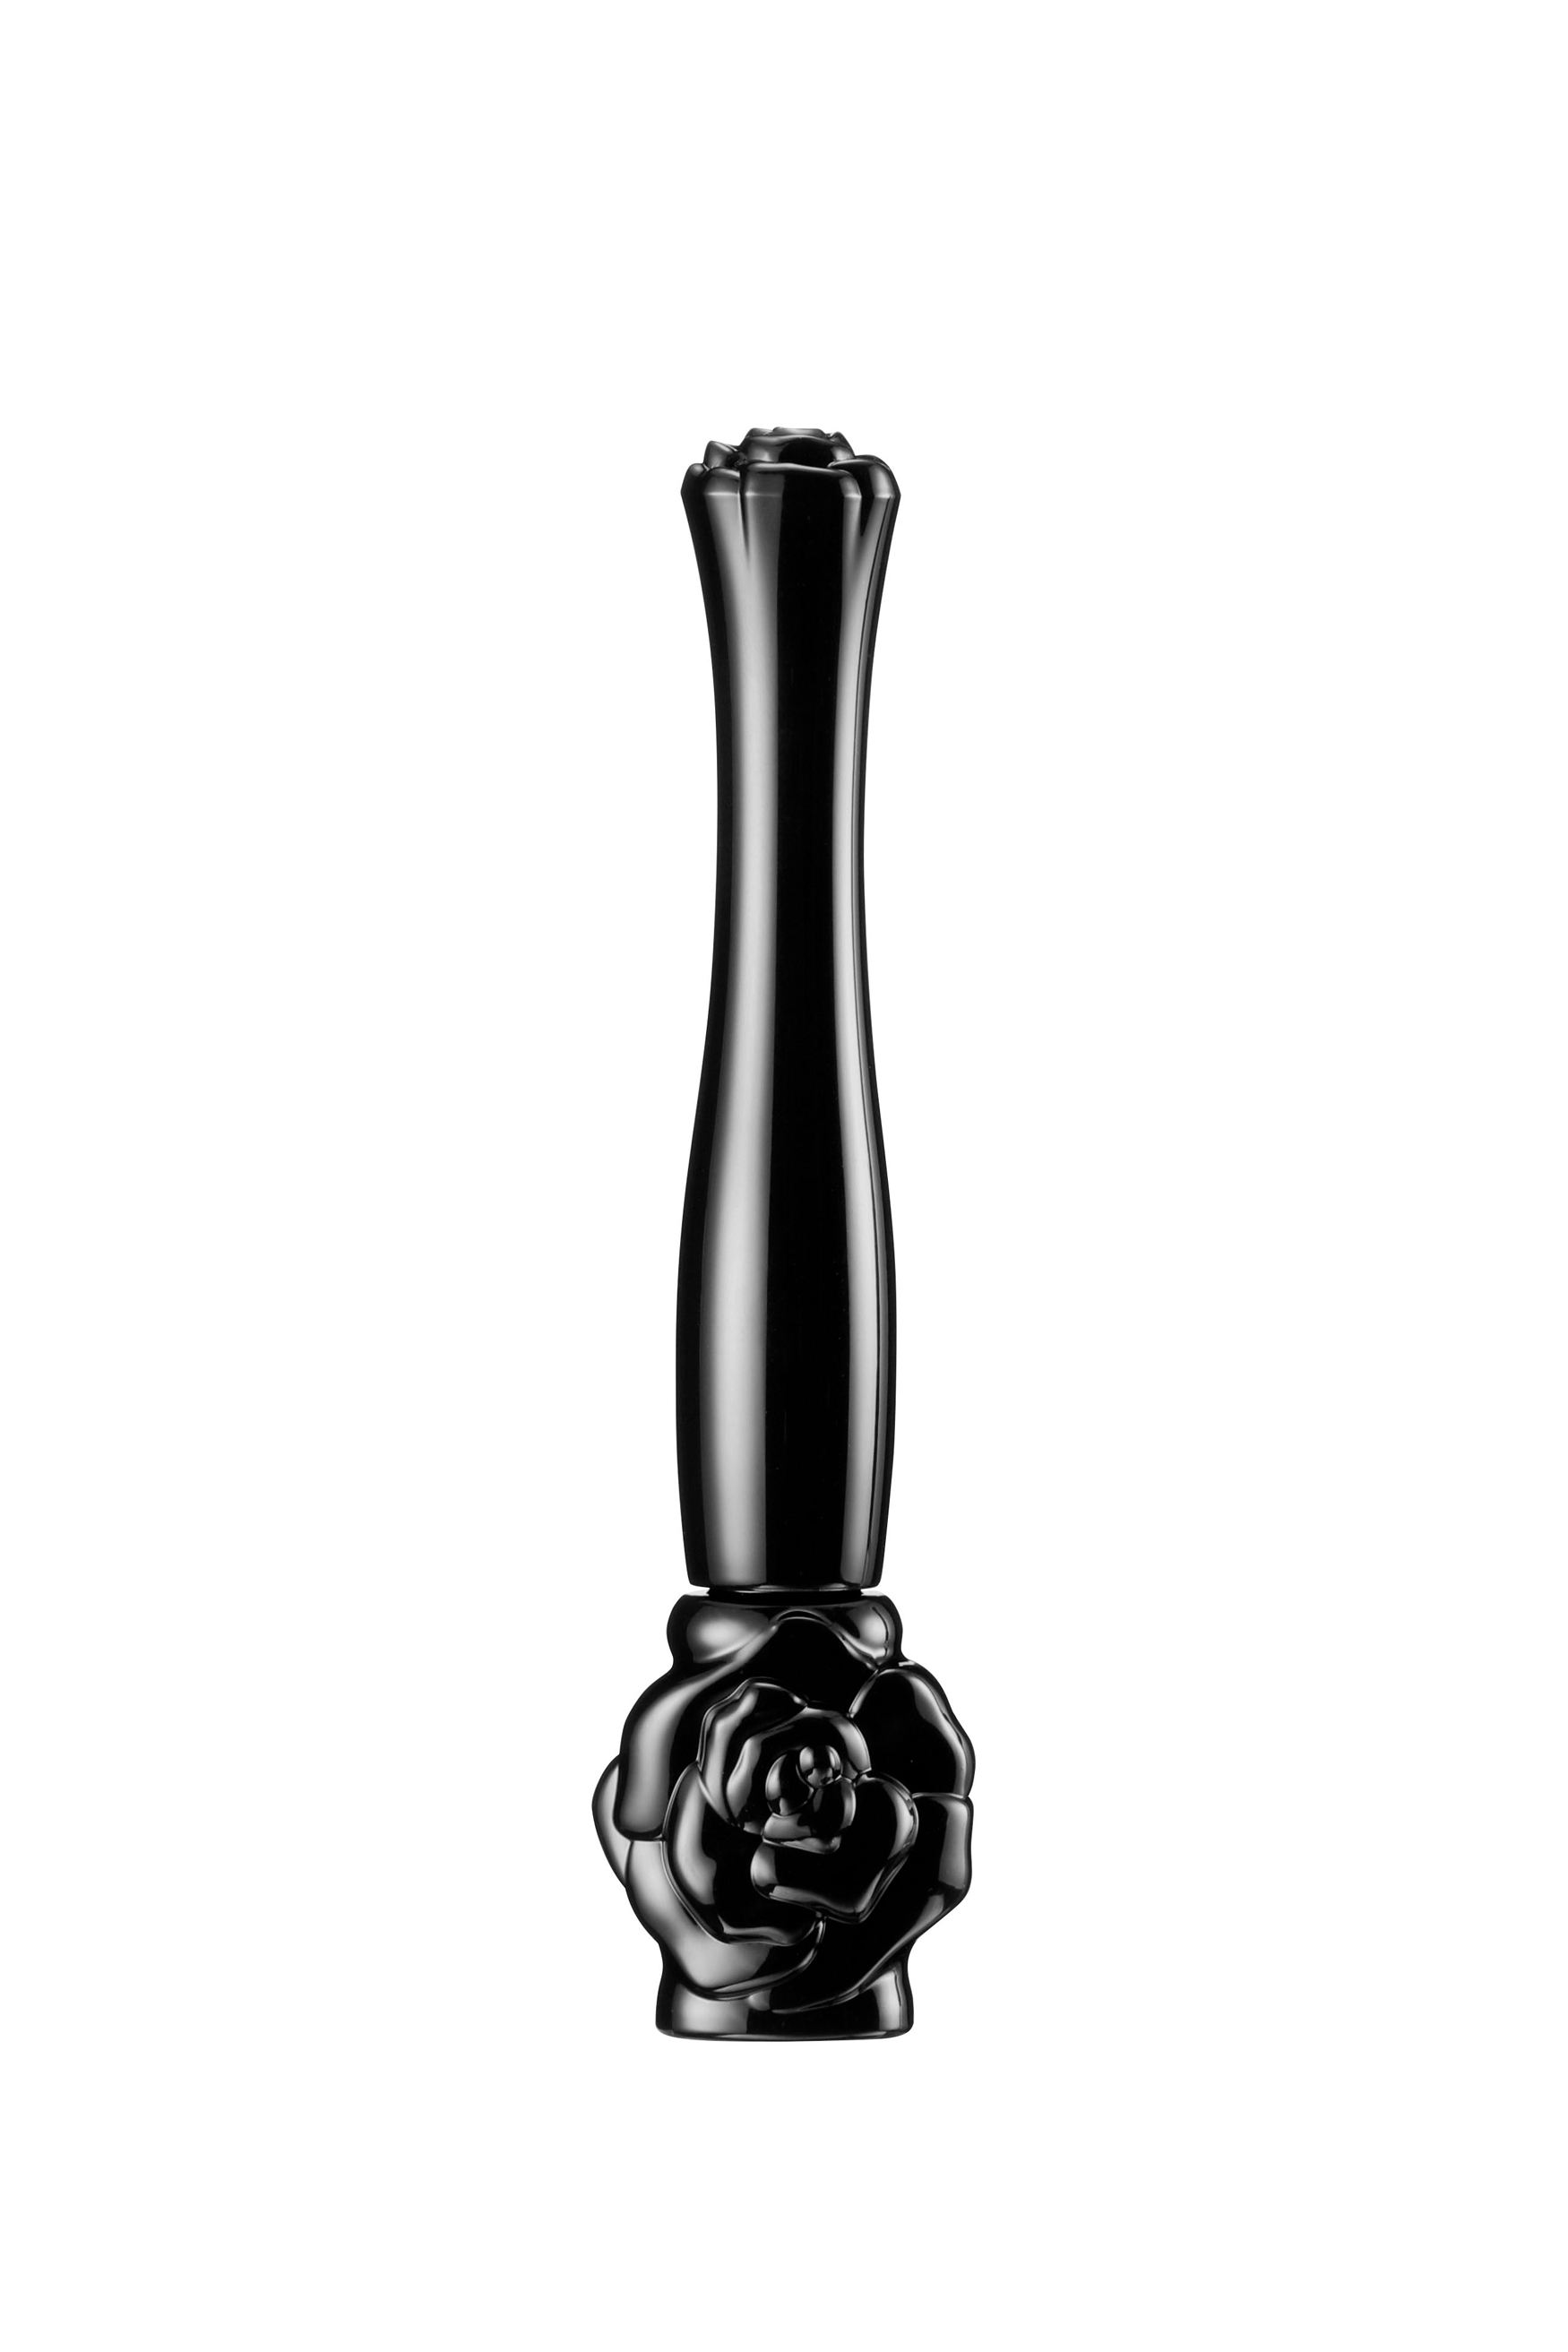 This Anna Sui Perfect Eyeliner is in a black rose with a long cap to protect the pencil 